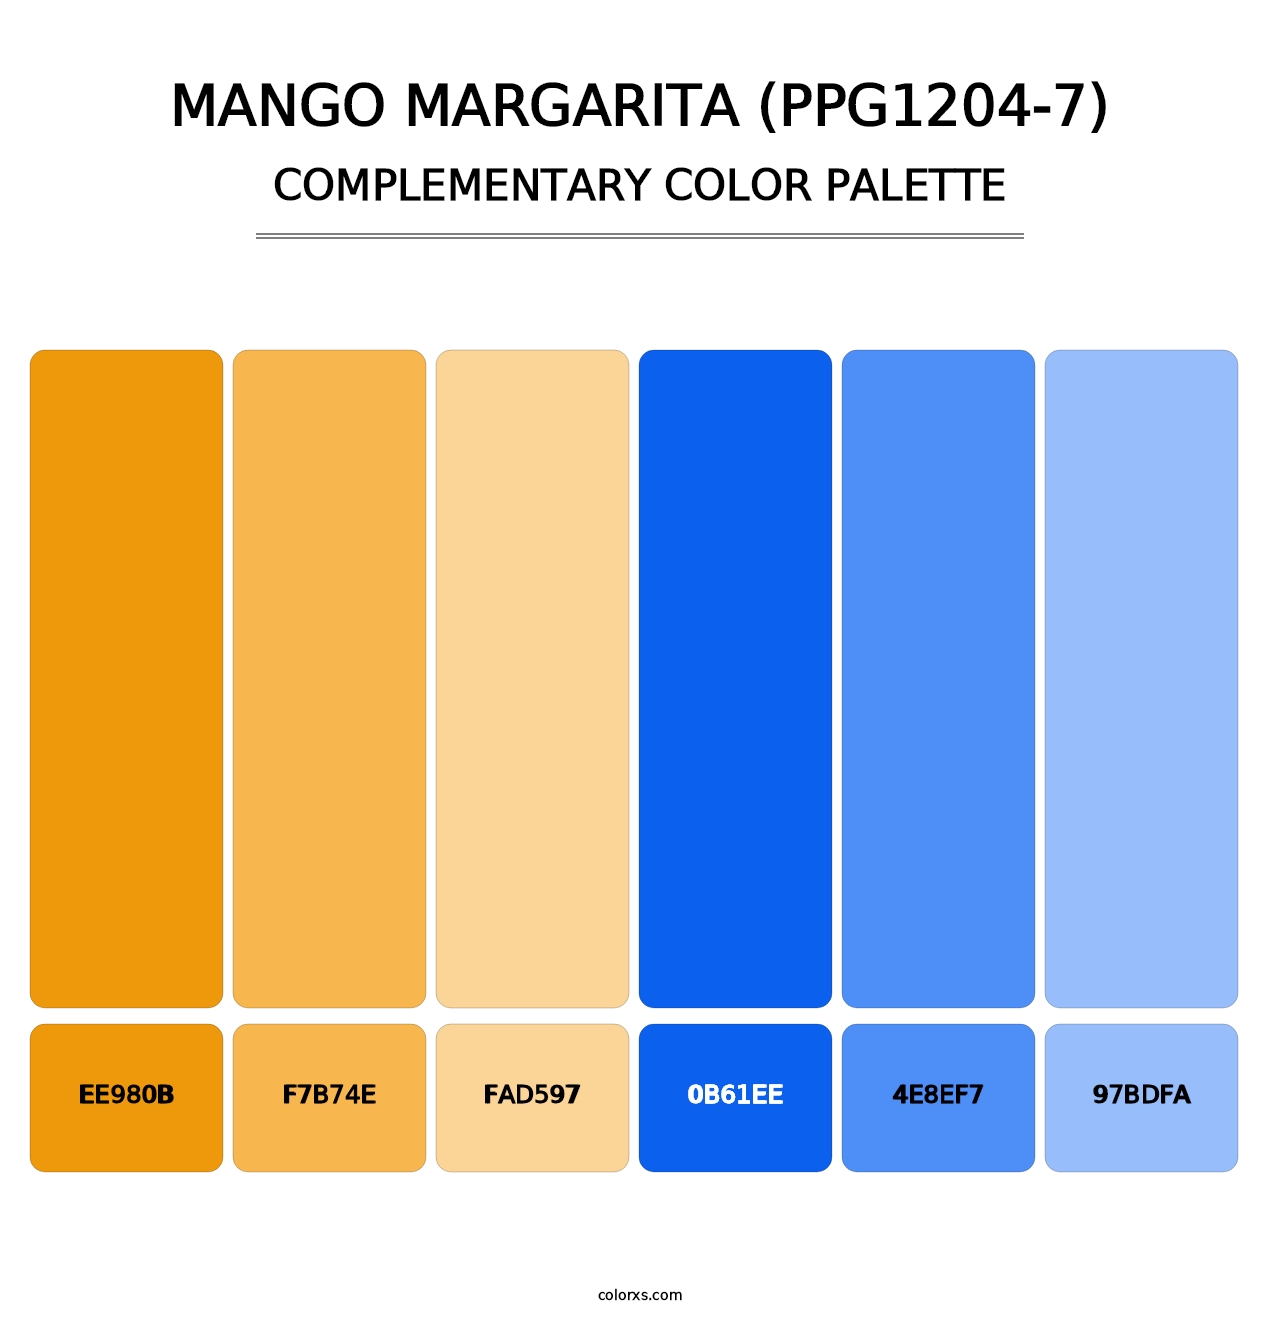 Mango Margarita (PPG1204-7) - Complementary Color Palette